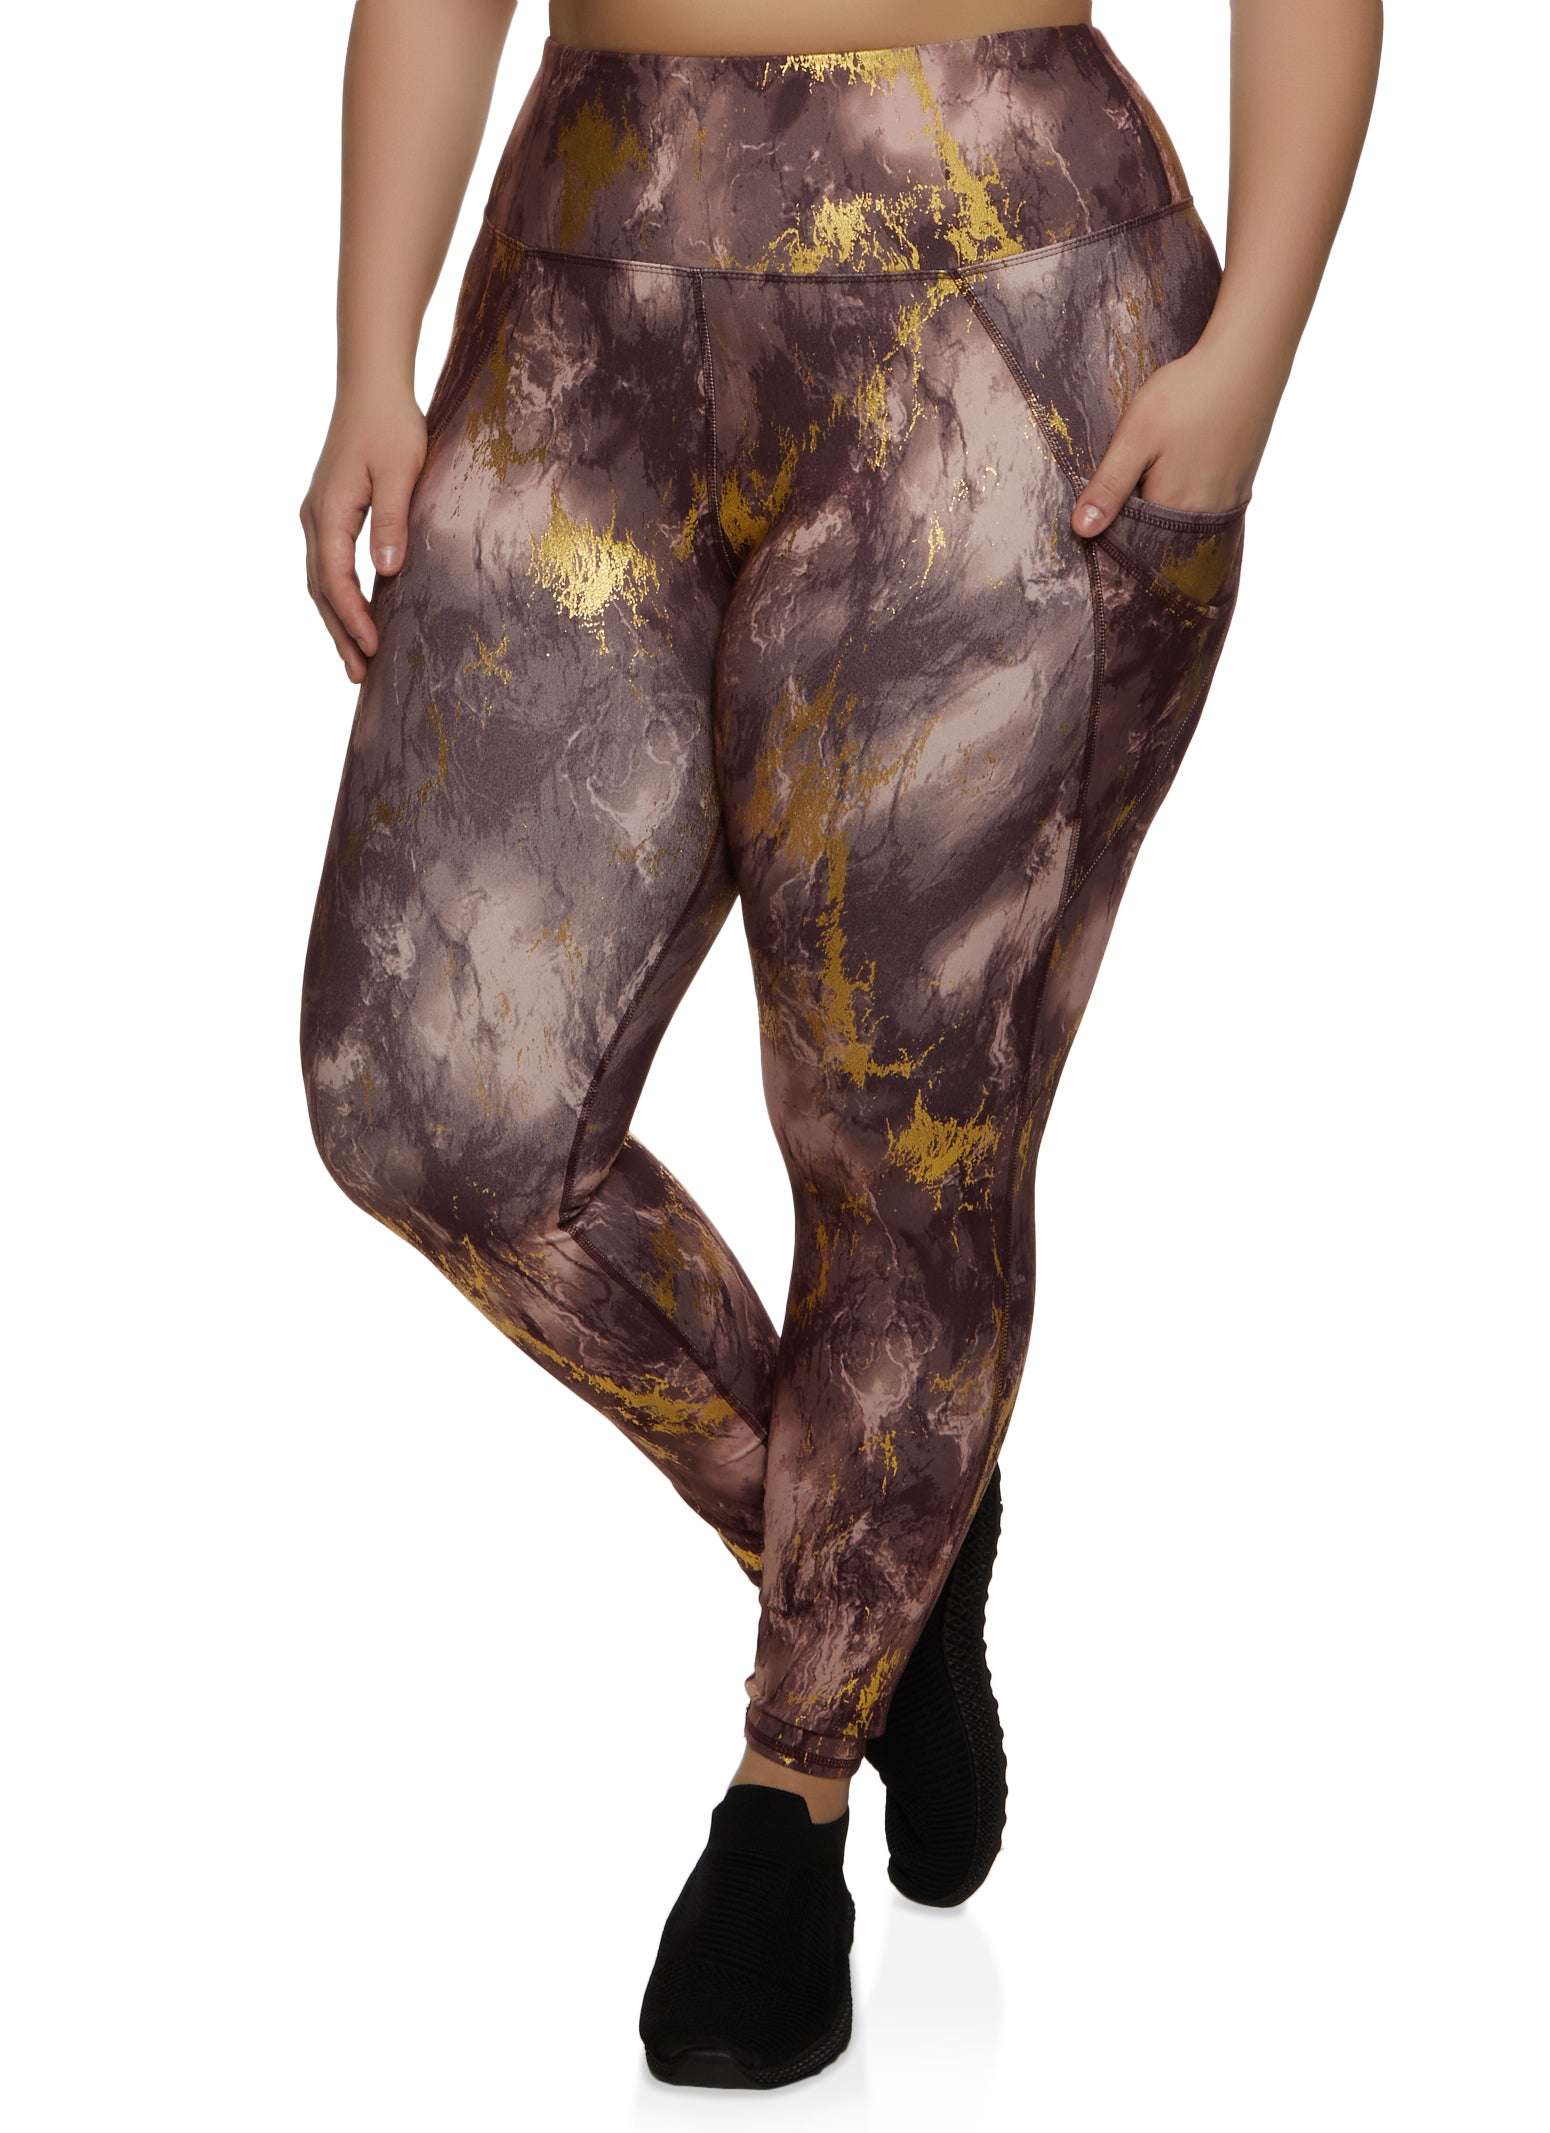 Foil Printed Legging with Pockets - Active Zone